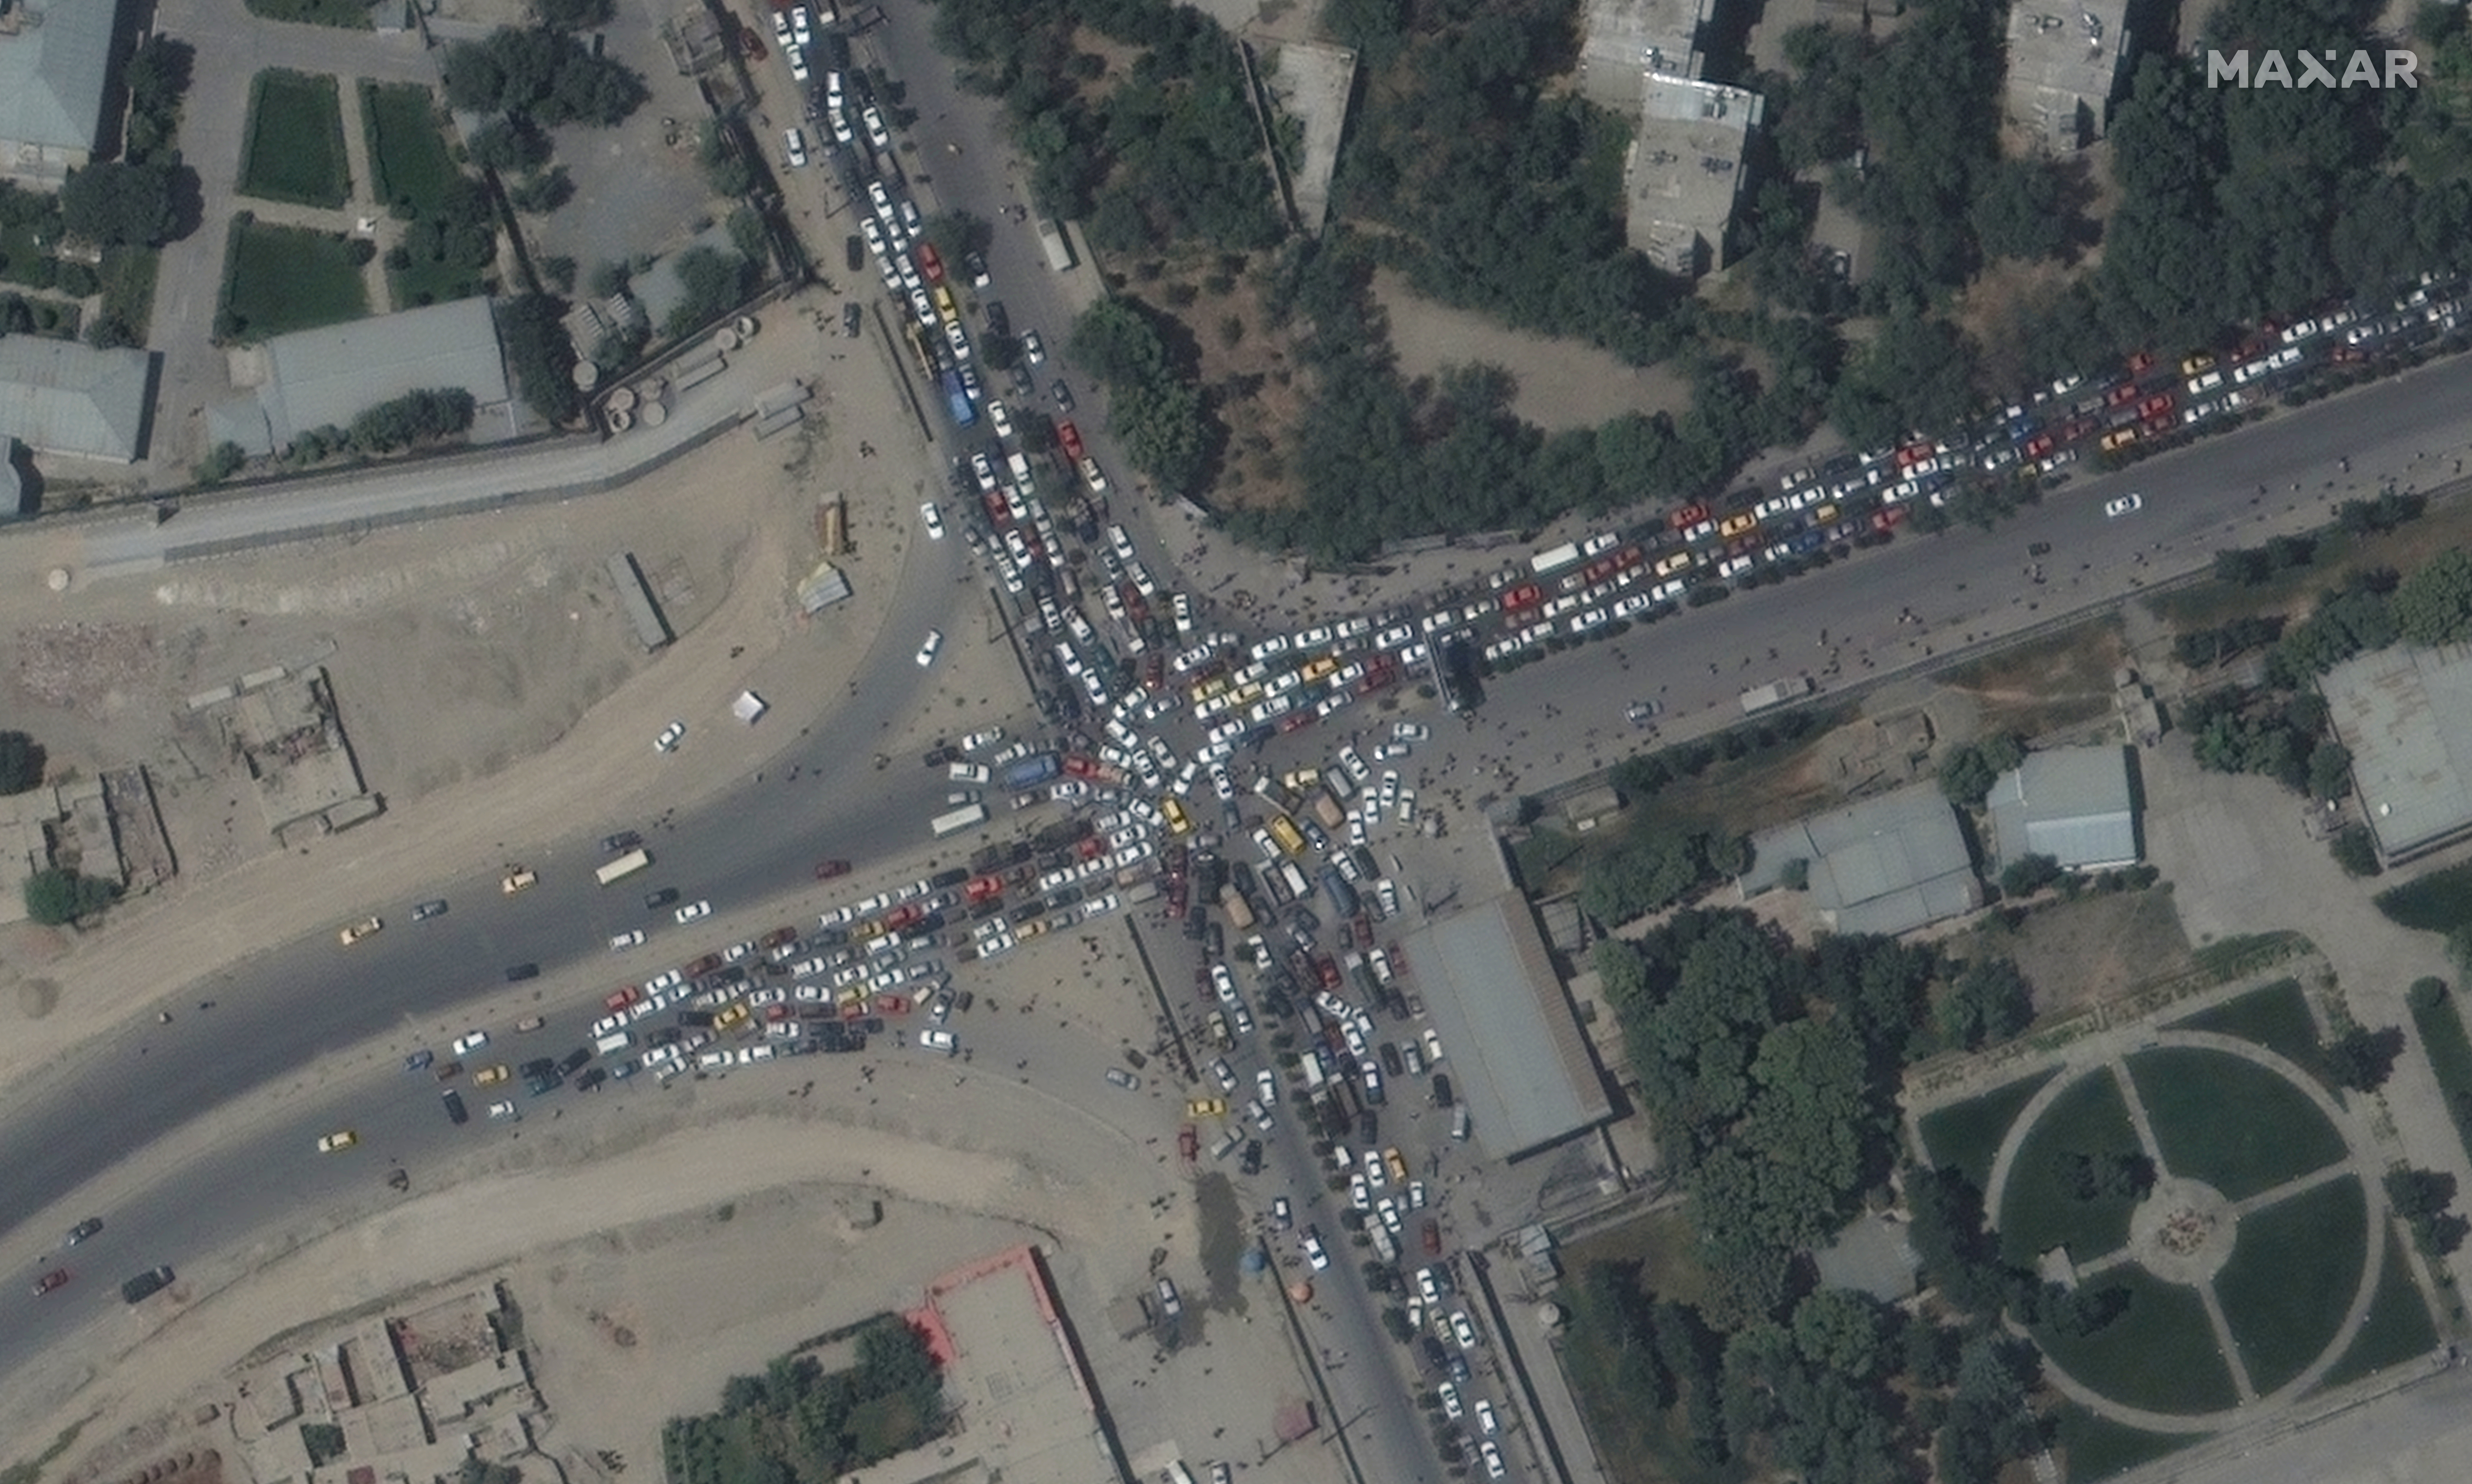 Traffic jam and crowds are seen near Kabul's airport in Afghanistan